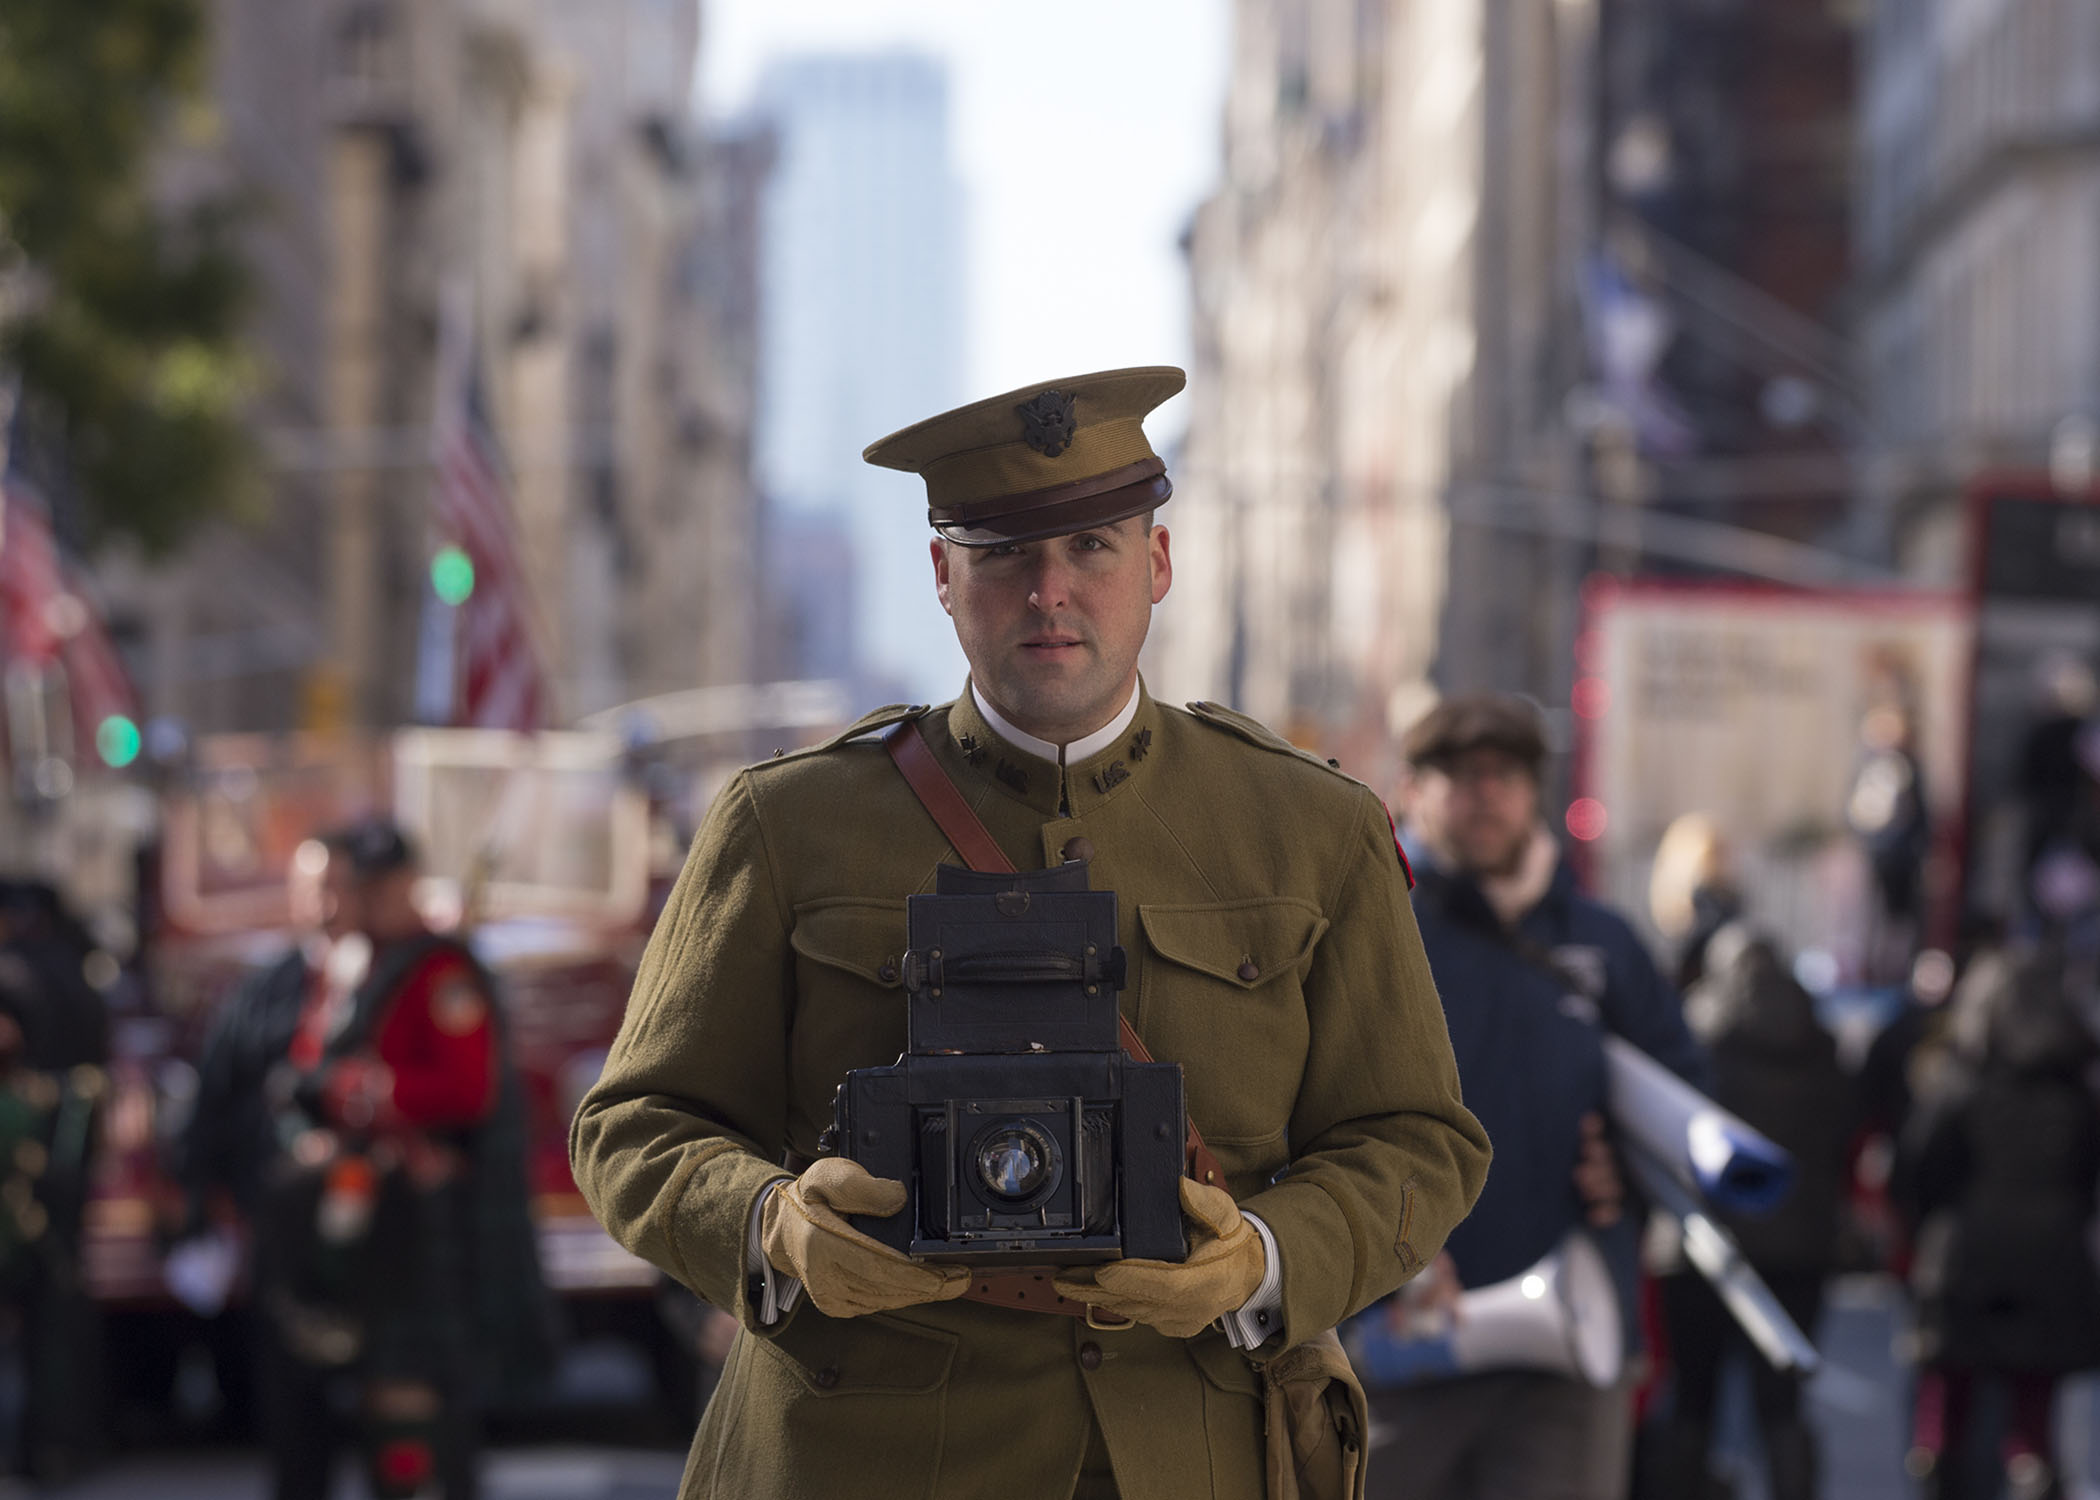 Person in hisortic uniform holding a vintage camera